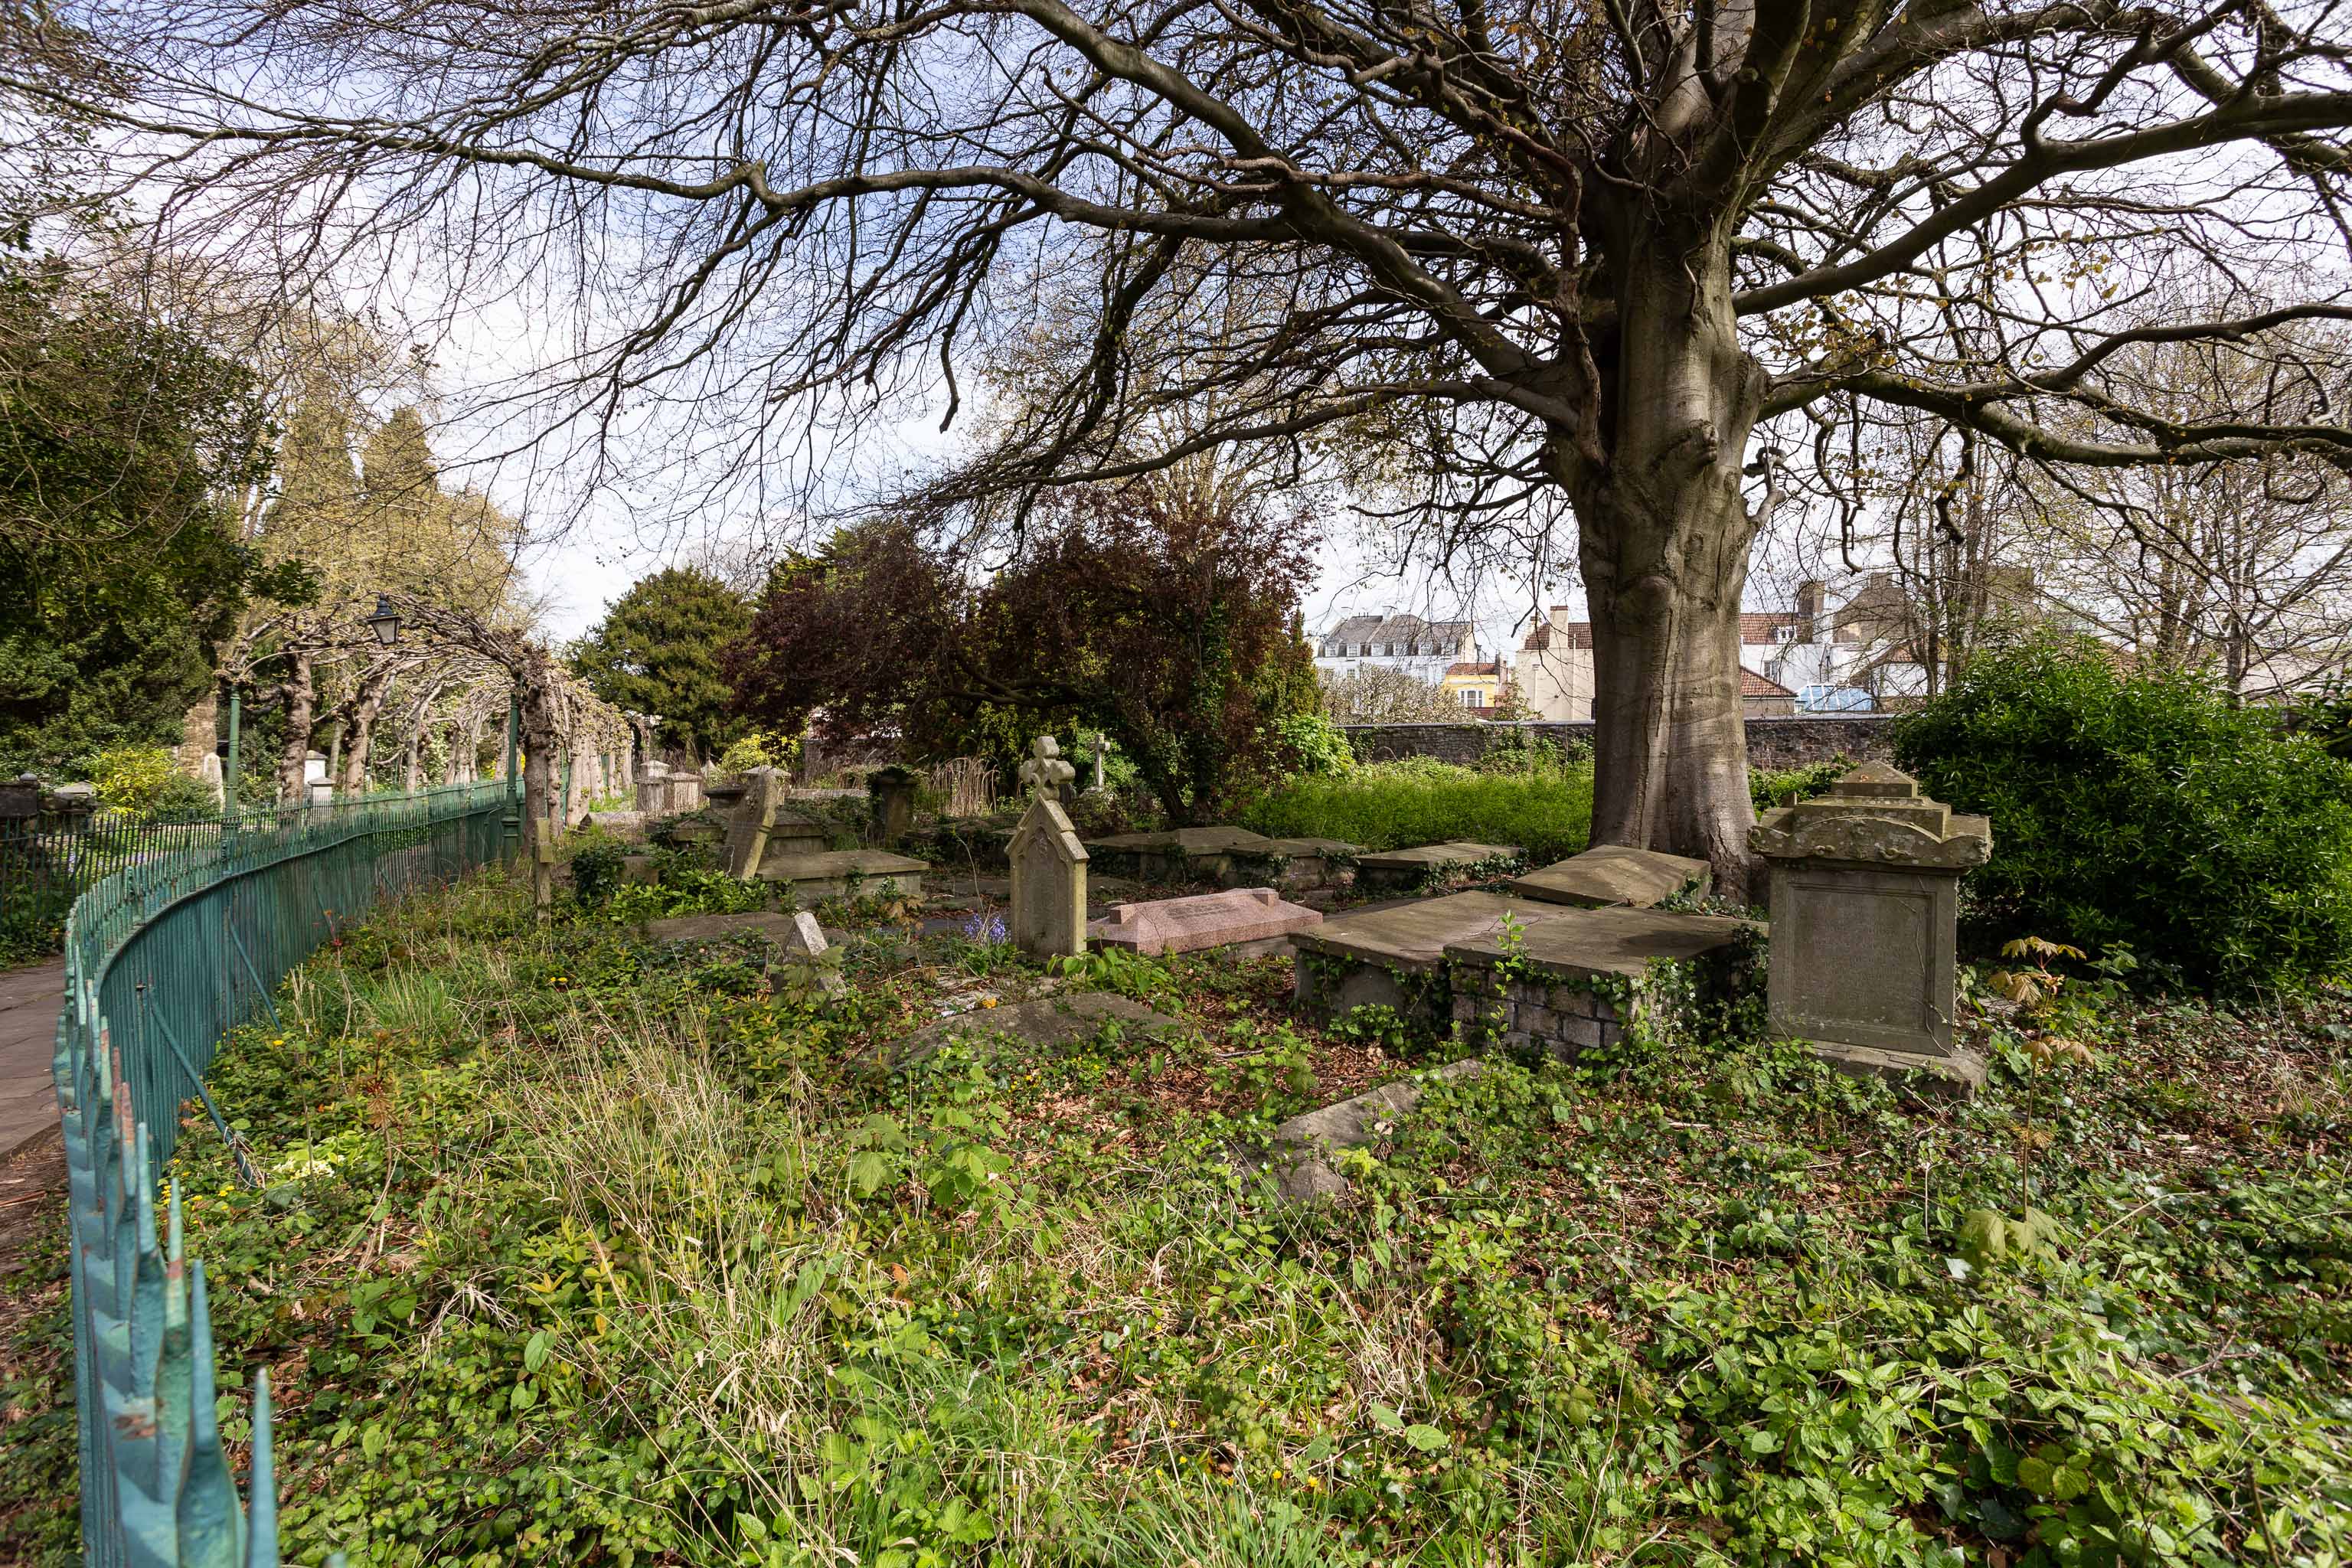 St Andrews Graves
Moving on from Clifton Hill, I fancied wandering through Lime Walk.

I always take a look for interesting graves as I wander through St Andrew's ch...